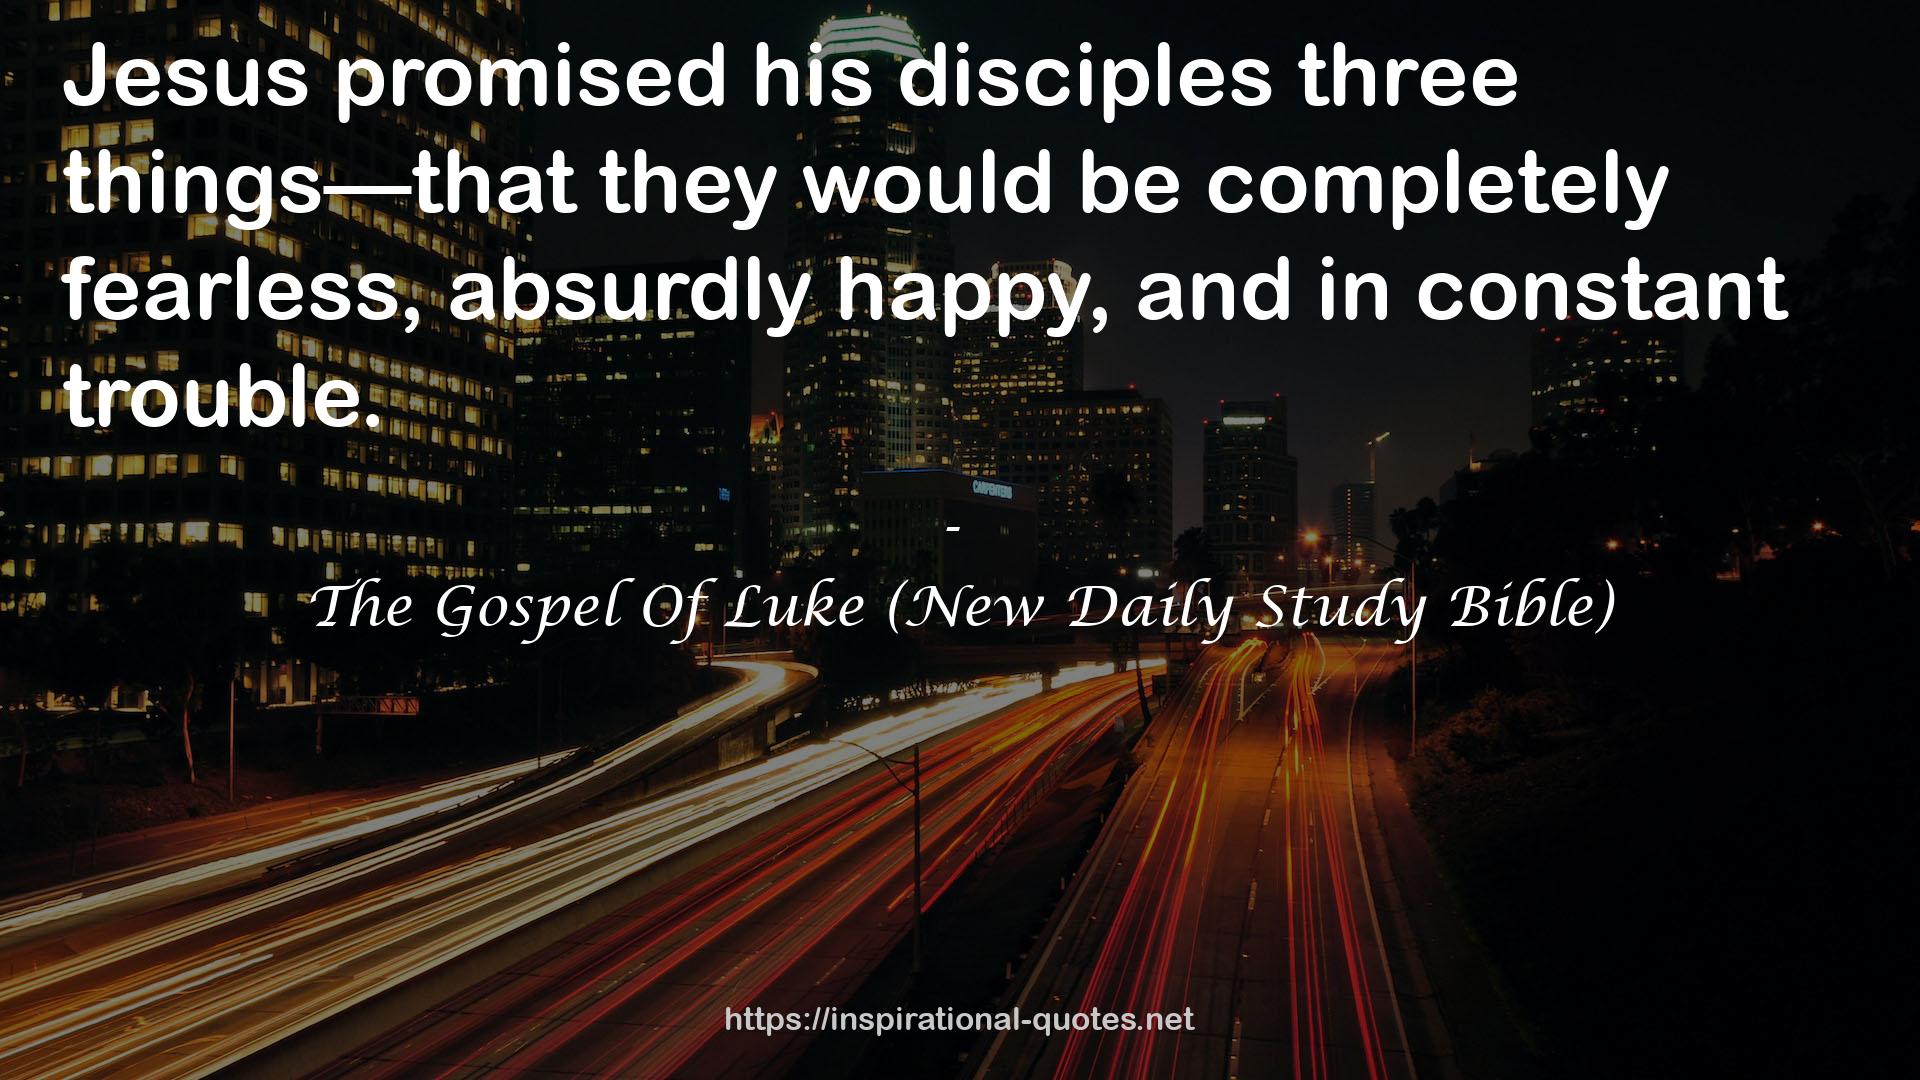 The Gospel Of Luke (New Daily Study Bible) QUOTES